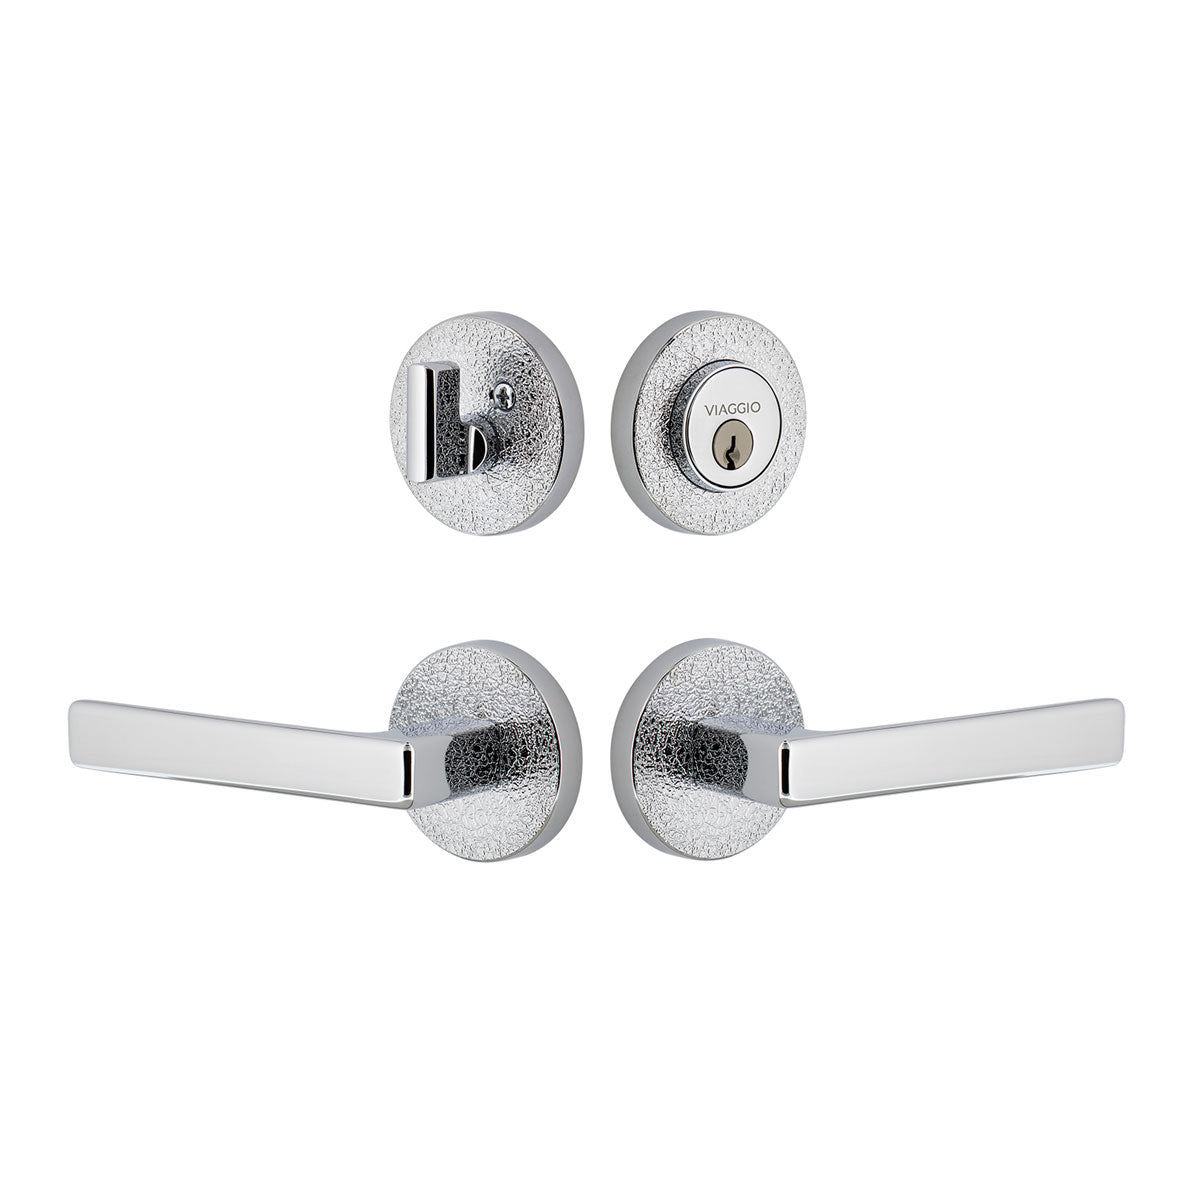 Circolo Leather Rosette Entry Set with Lusso Lever in Bright Chrome